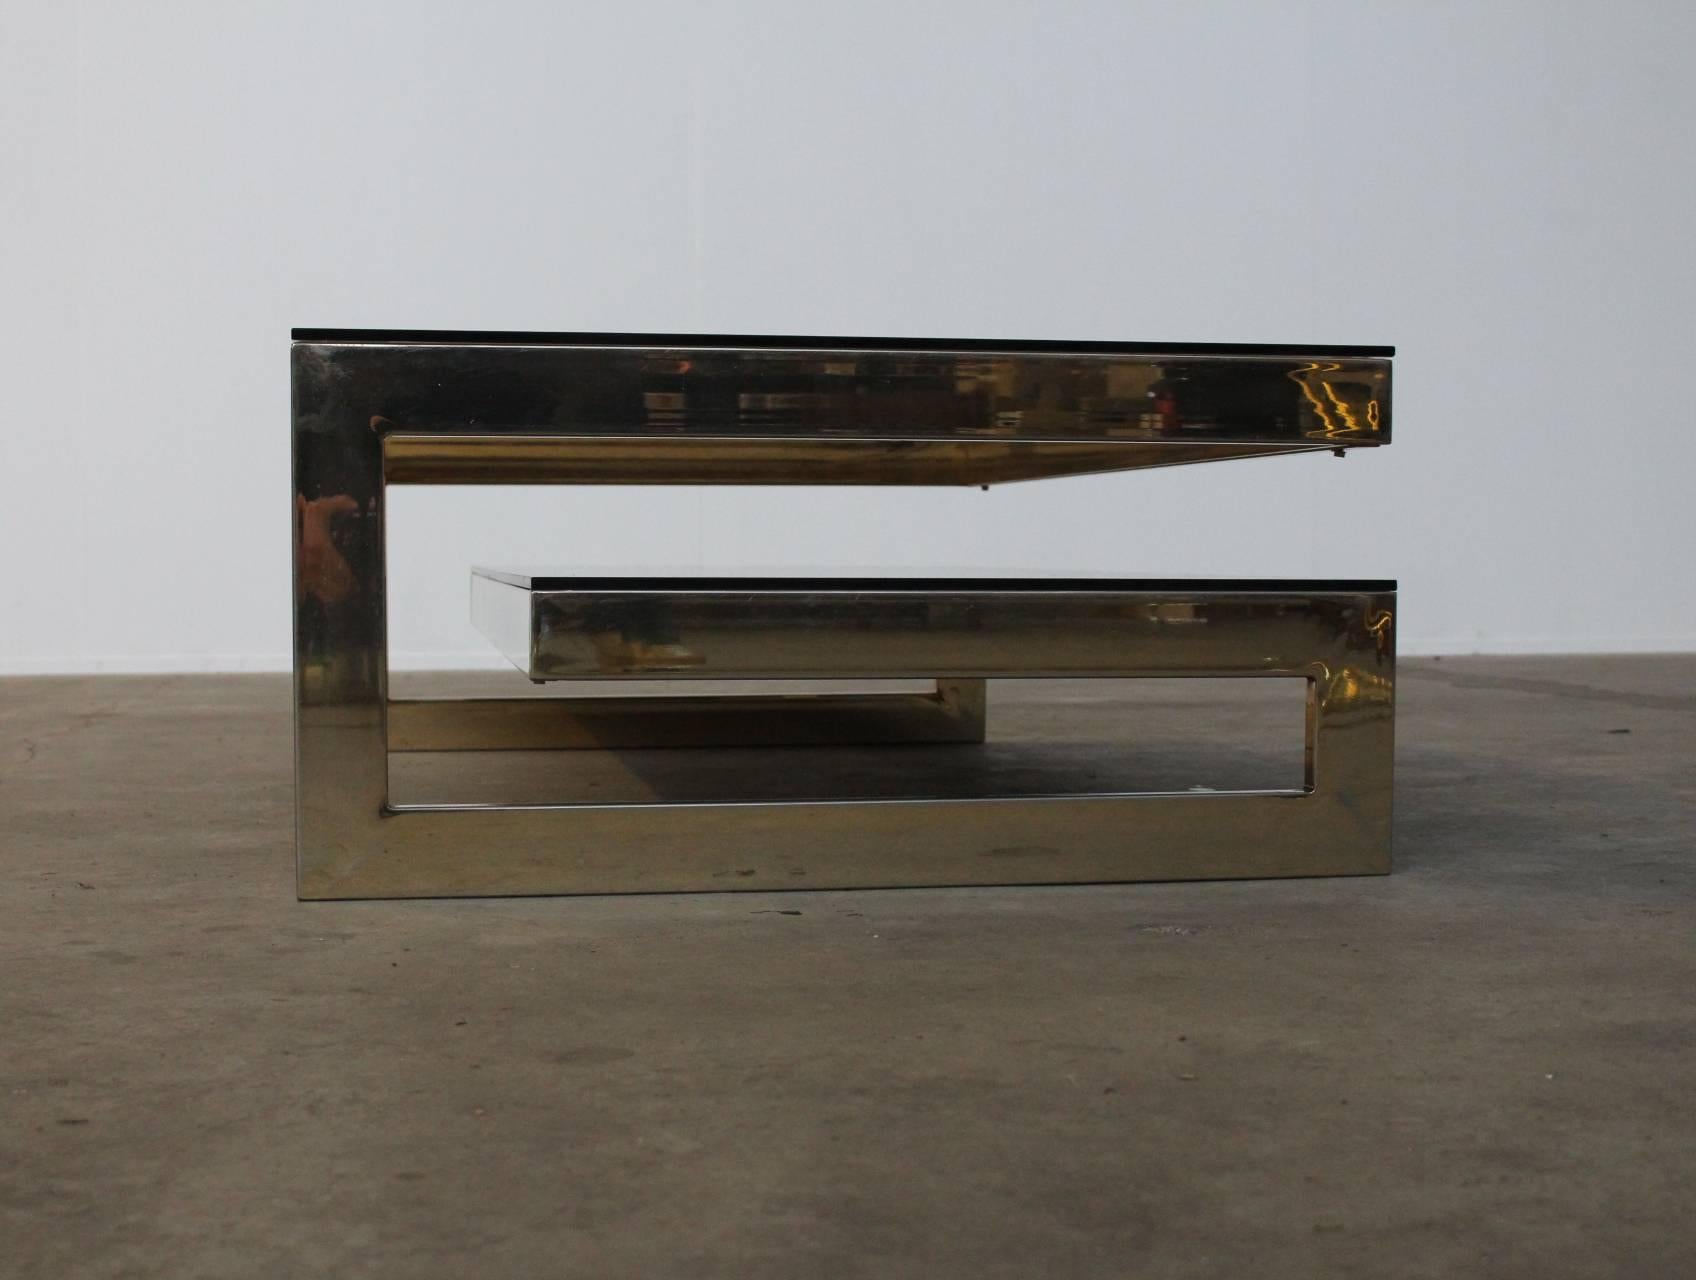 Two Identical available. Stunning architectural two-tiered rectangular gold plated 23 carat coffee table by Belgo Chrome, in Maison Jansen style, circa 1970. A very eye-catching Minimalist yet Hollywood Regency design. On the bottom level a smoked